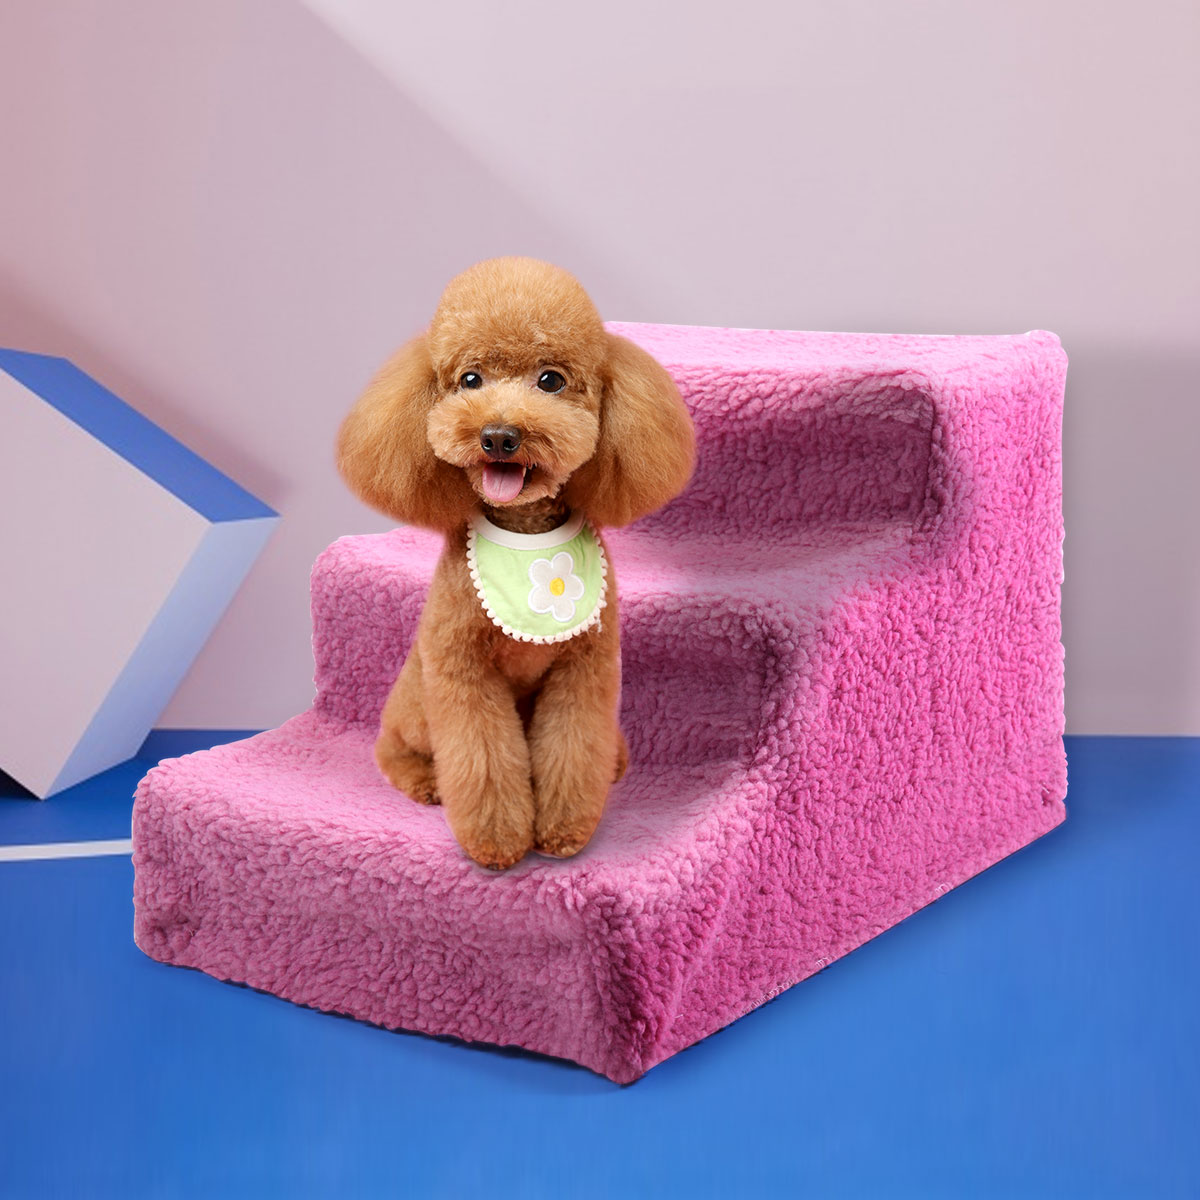 Coziwow Pet Stairs 3 Steps Indoor Dog Cat Steps Removable Washable Pets Ramp Ladder Pink - image 3 of 10